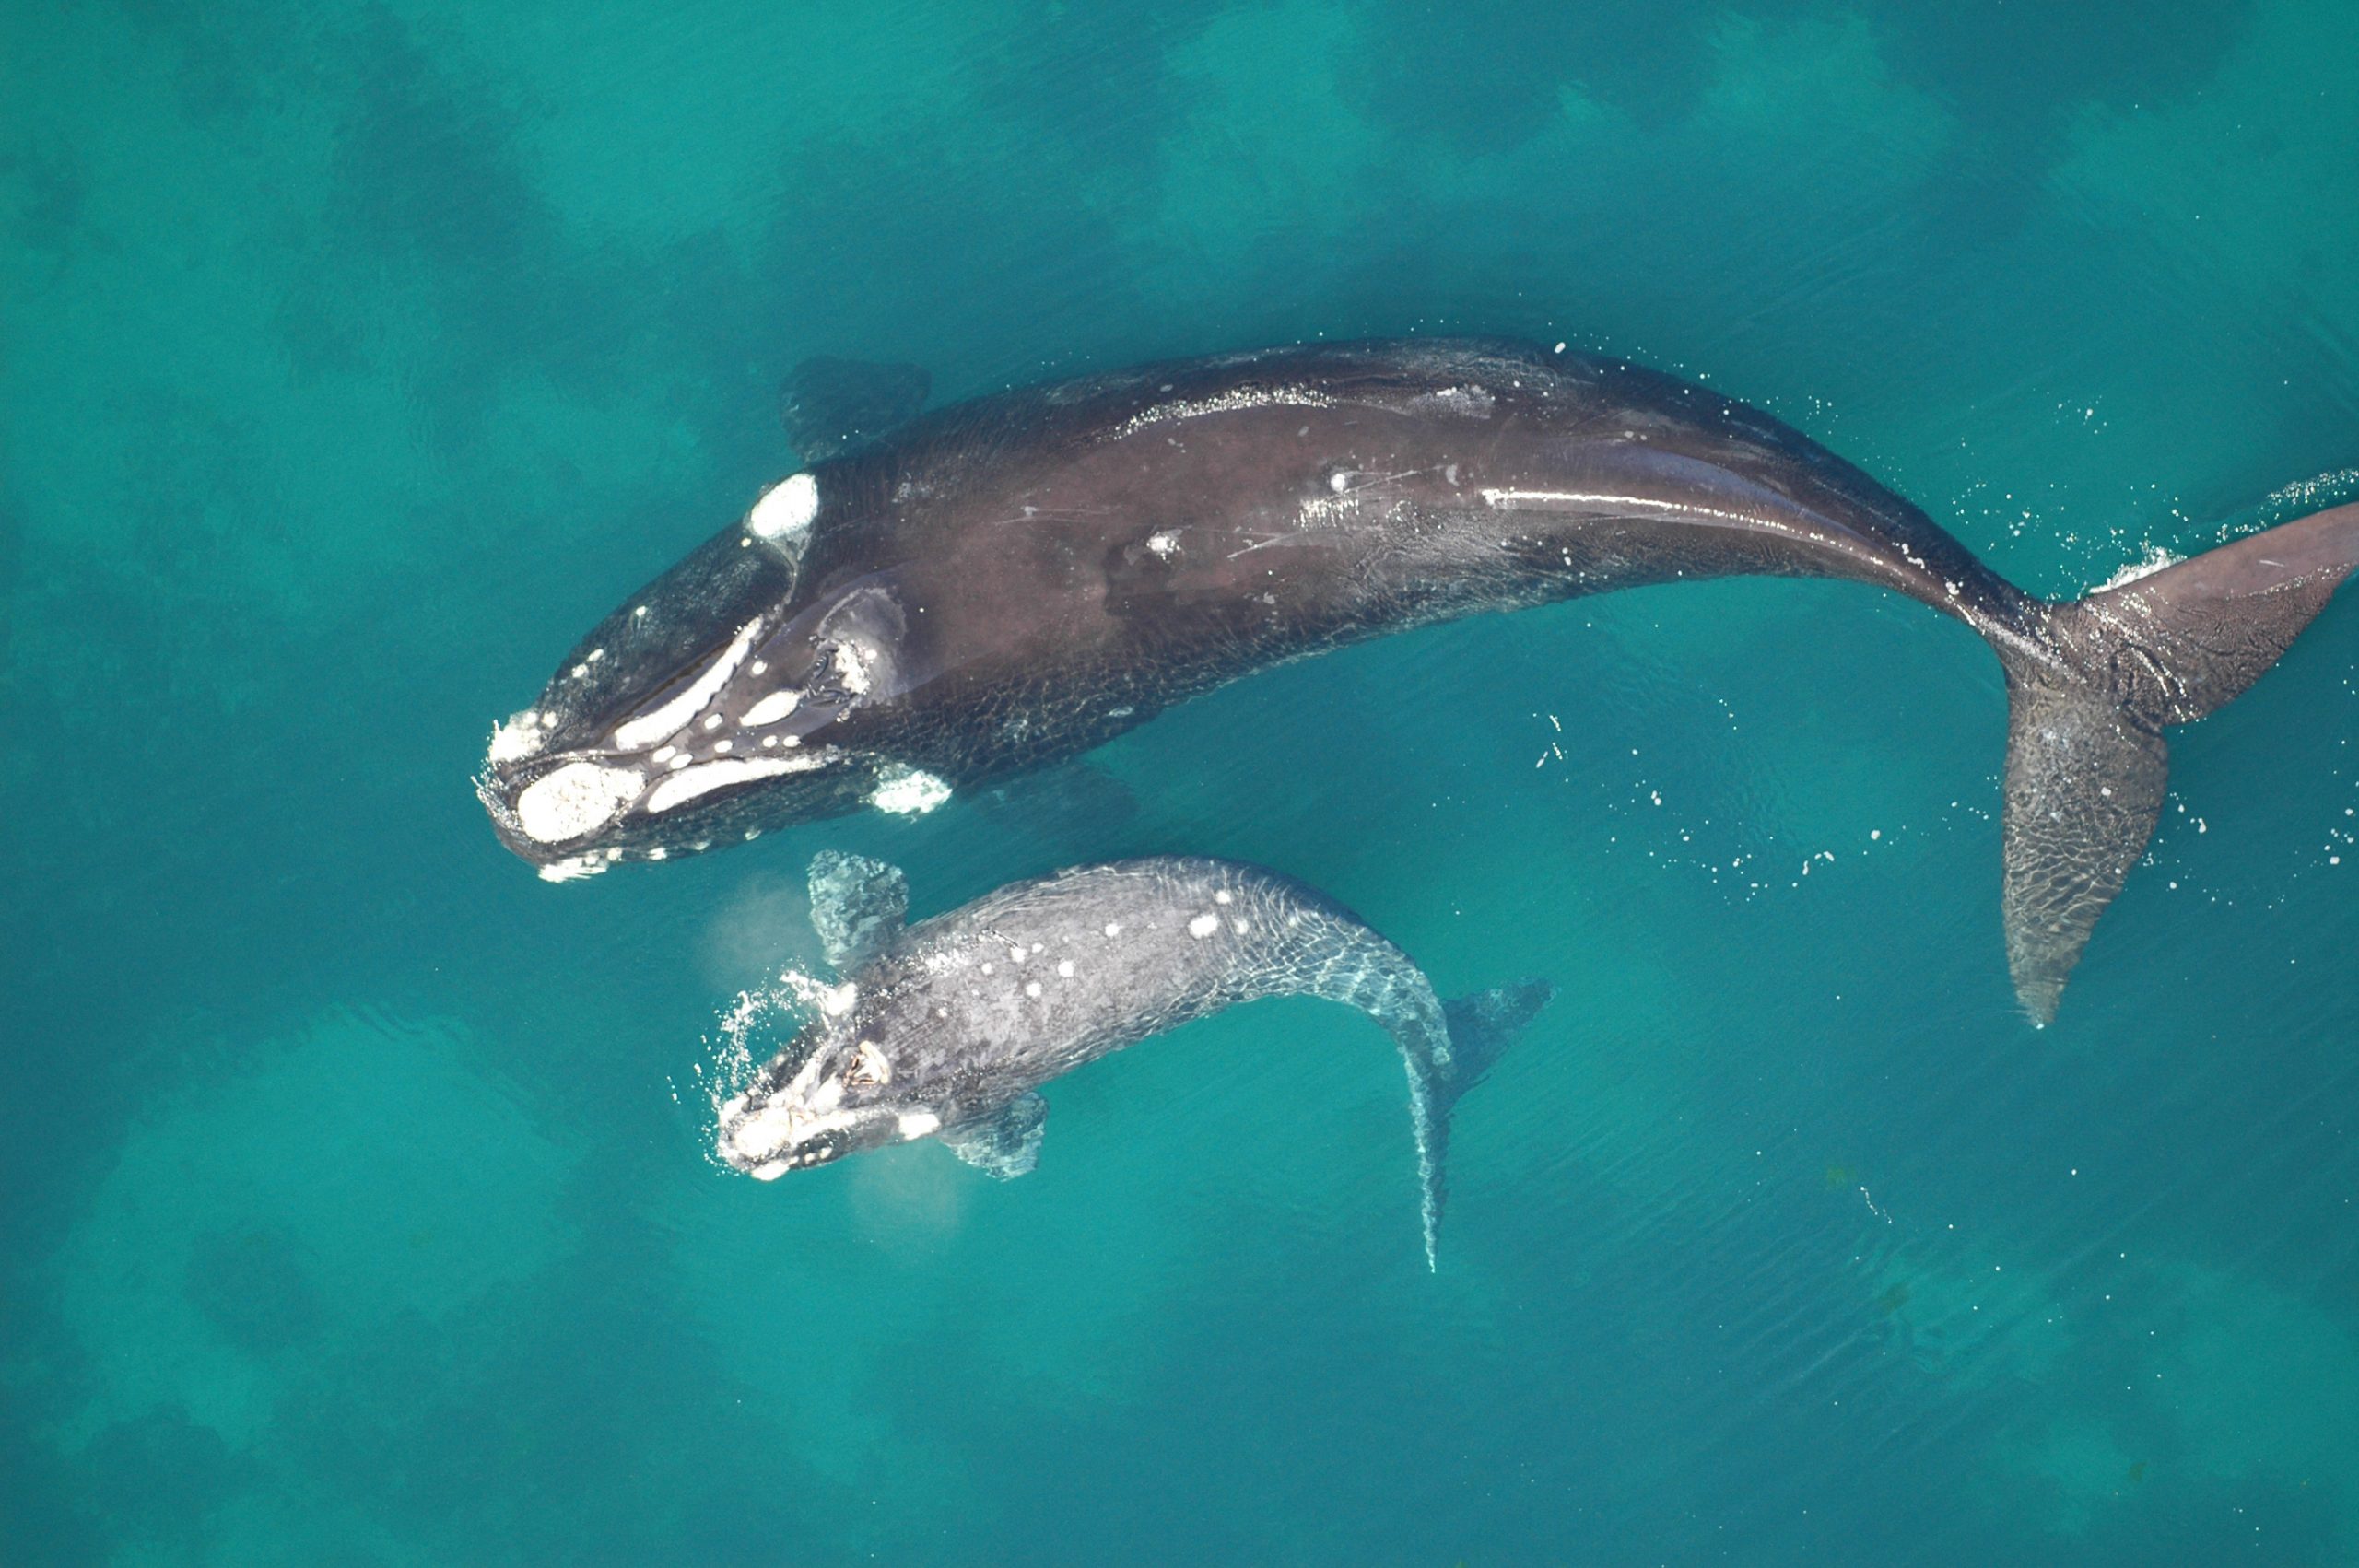 For a month after birth, Southern right whale mothers and their calves rest and nurse. Then, like the pair shown here off Argentina, they start to swim faster and farther as they prepare for a long migration in the South Atlantic to reach their feeding areas. A University of Utah study found mother whales teach their calves where to eat, raising concern about whether the whales can adapt as global warming disrupts feeding grounds.